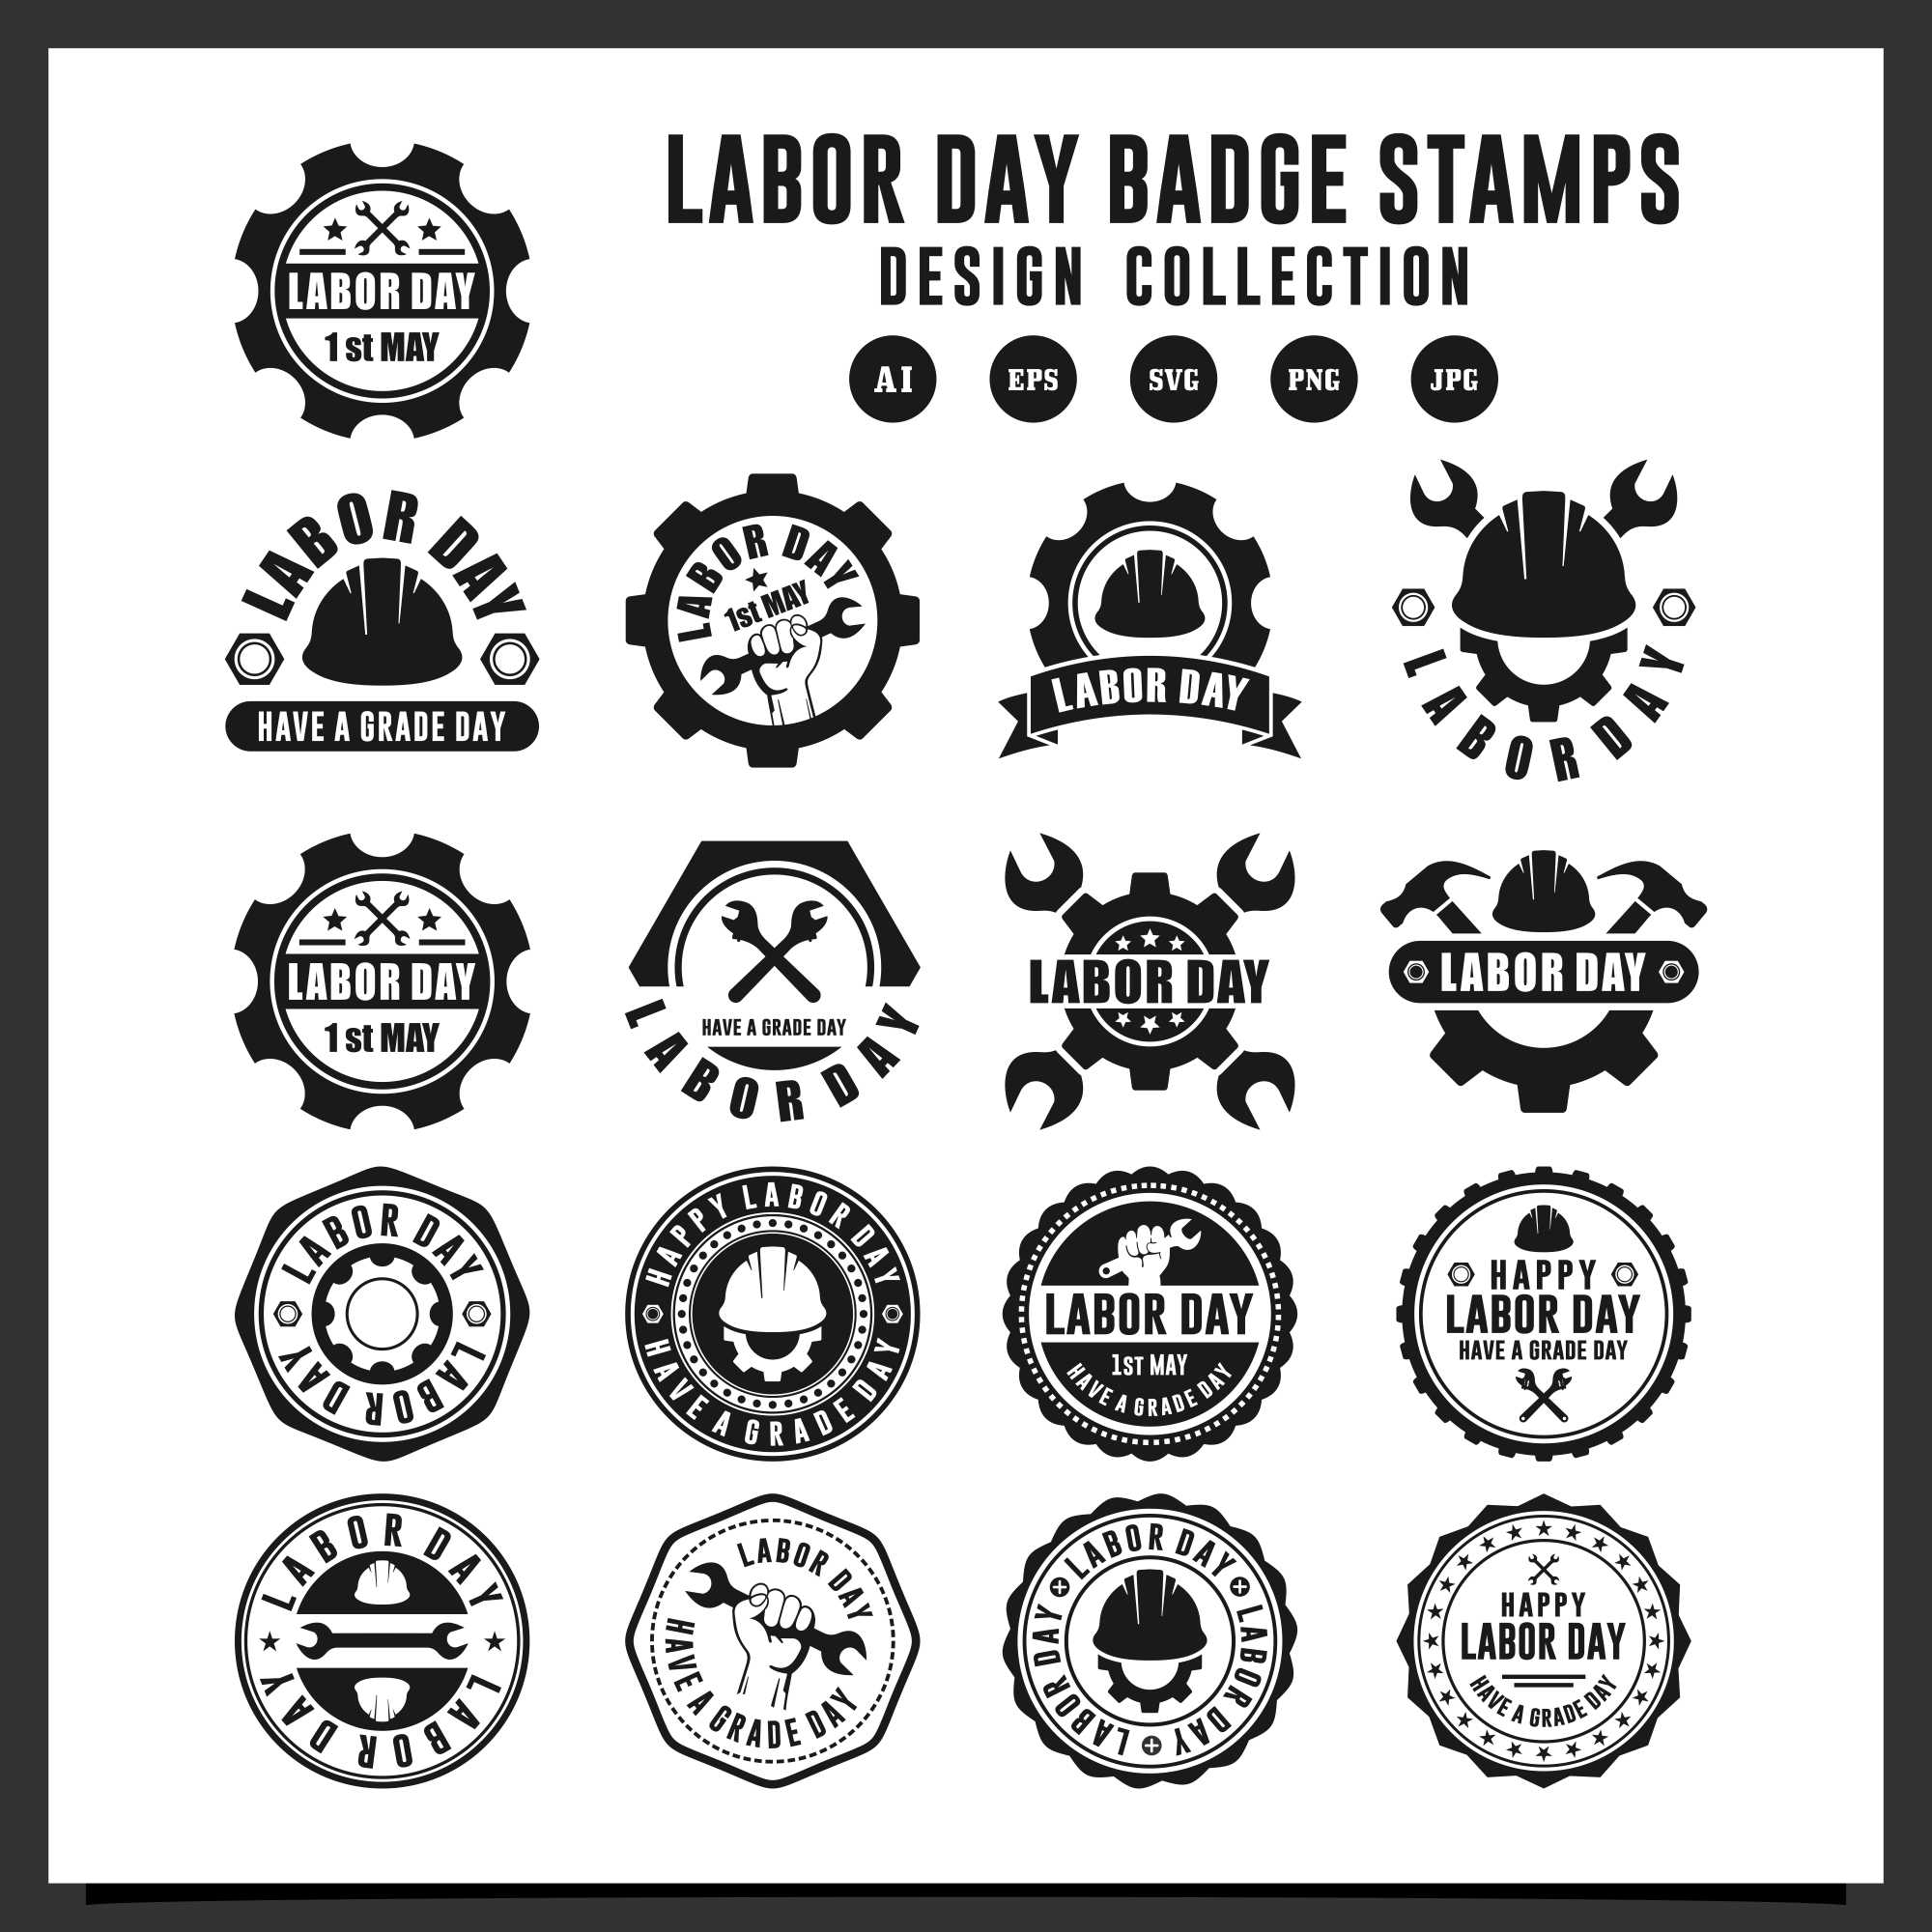 17 Labor Day badge stamps logo design - $6 cover image.